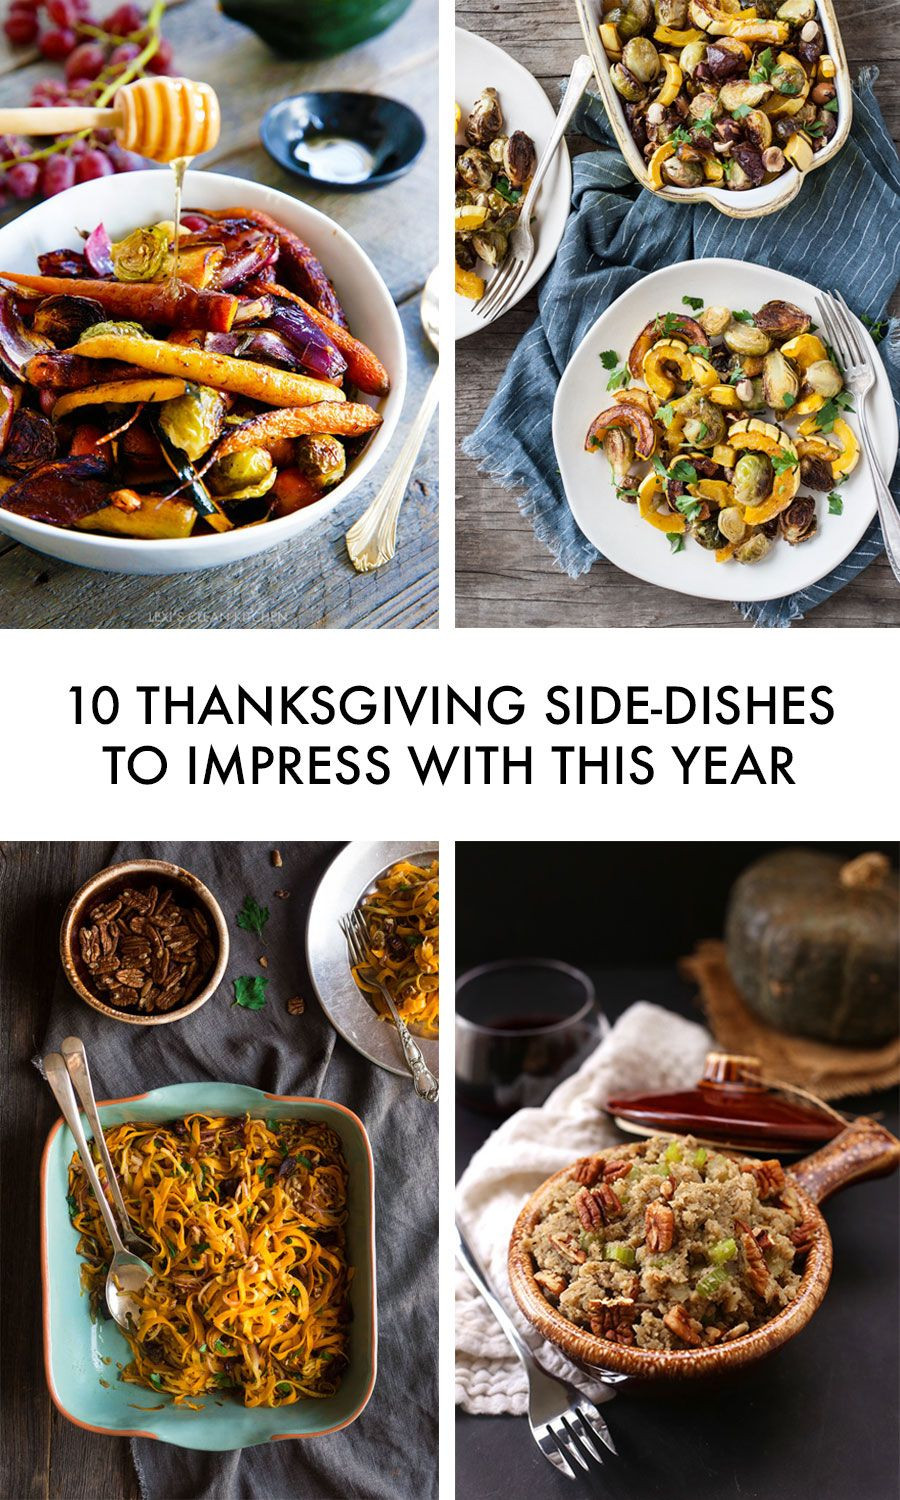 Paleo Thanksgiving Sides Lovely 10 Paleo Thanksgiving Sides to Impress with This Year